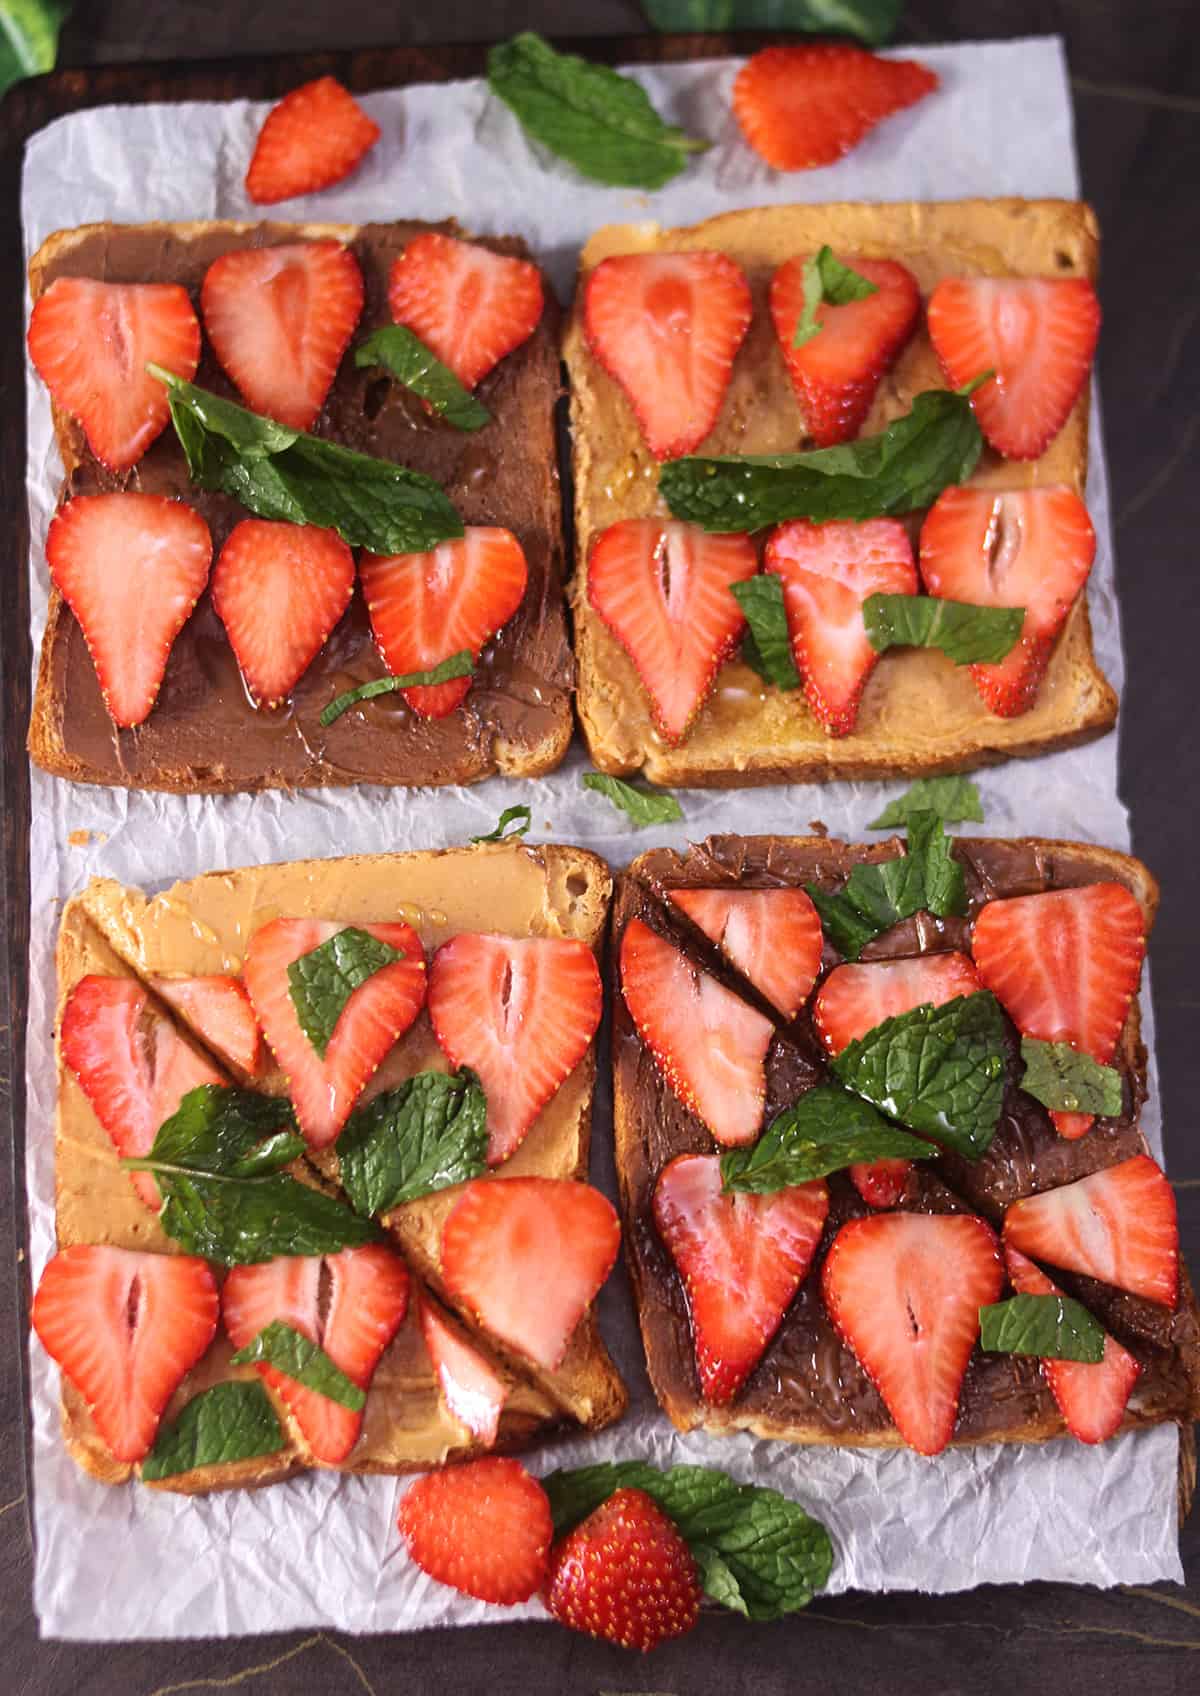 Strawberry toast with peanut butter and nutella placed on parchment paper, garnished with mint leaves. 